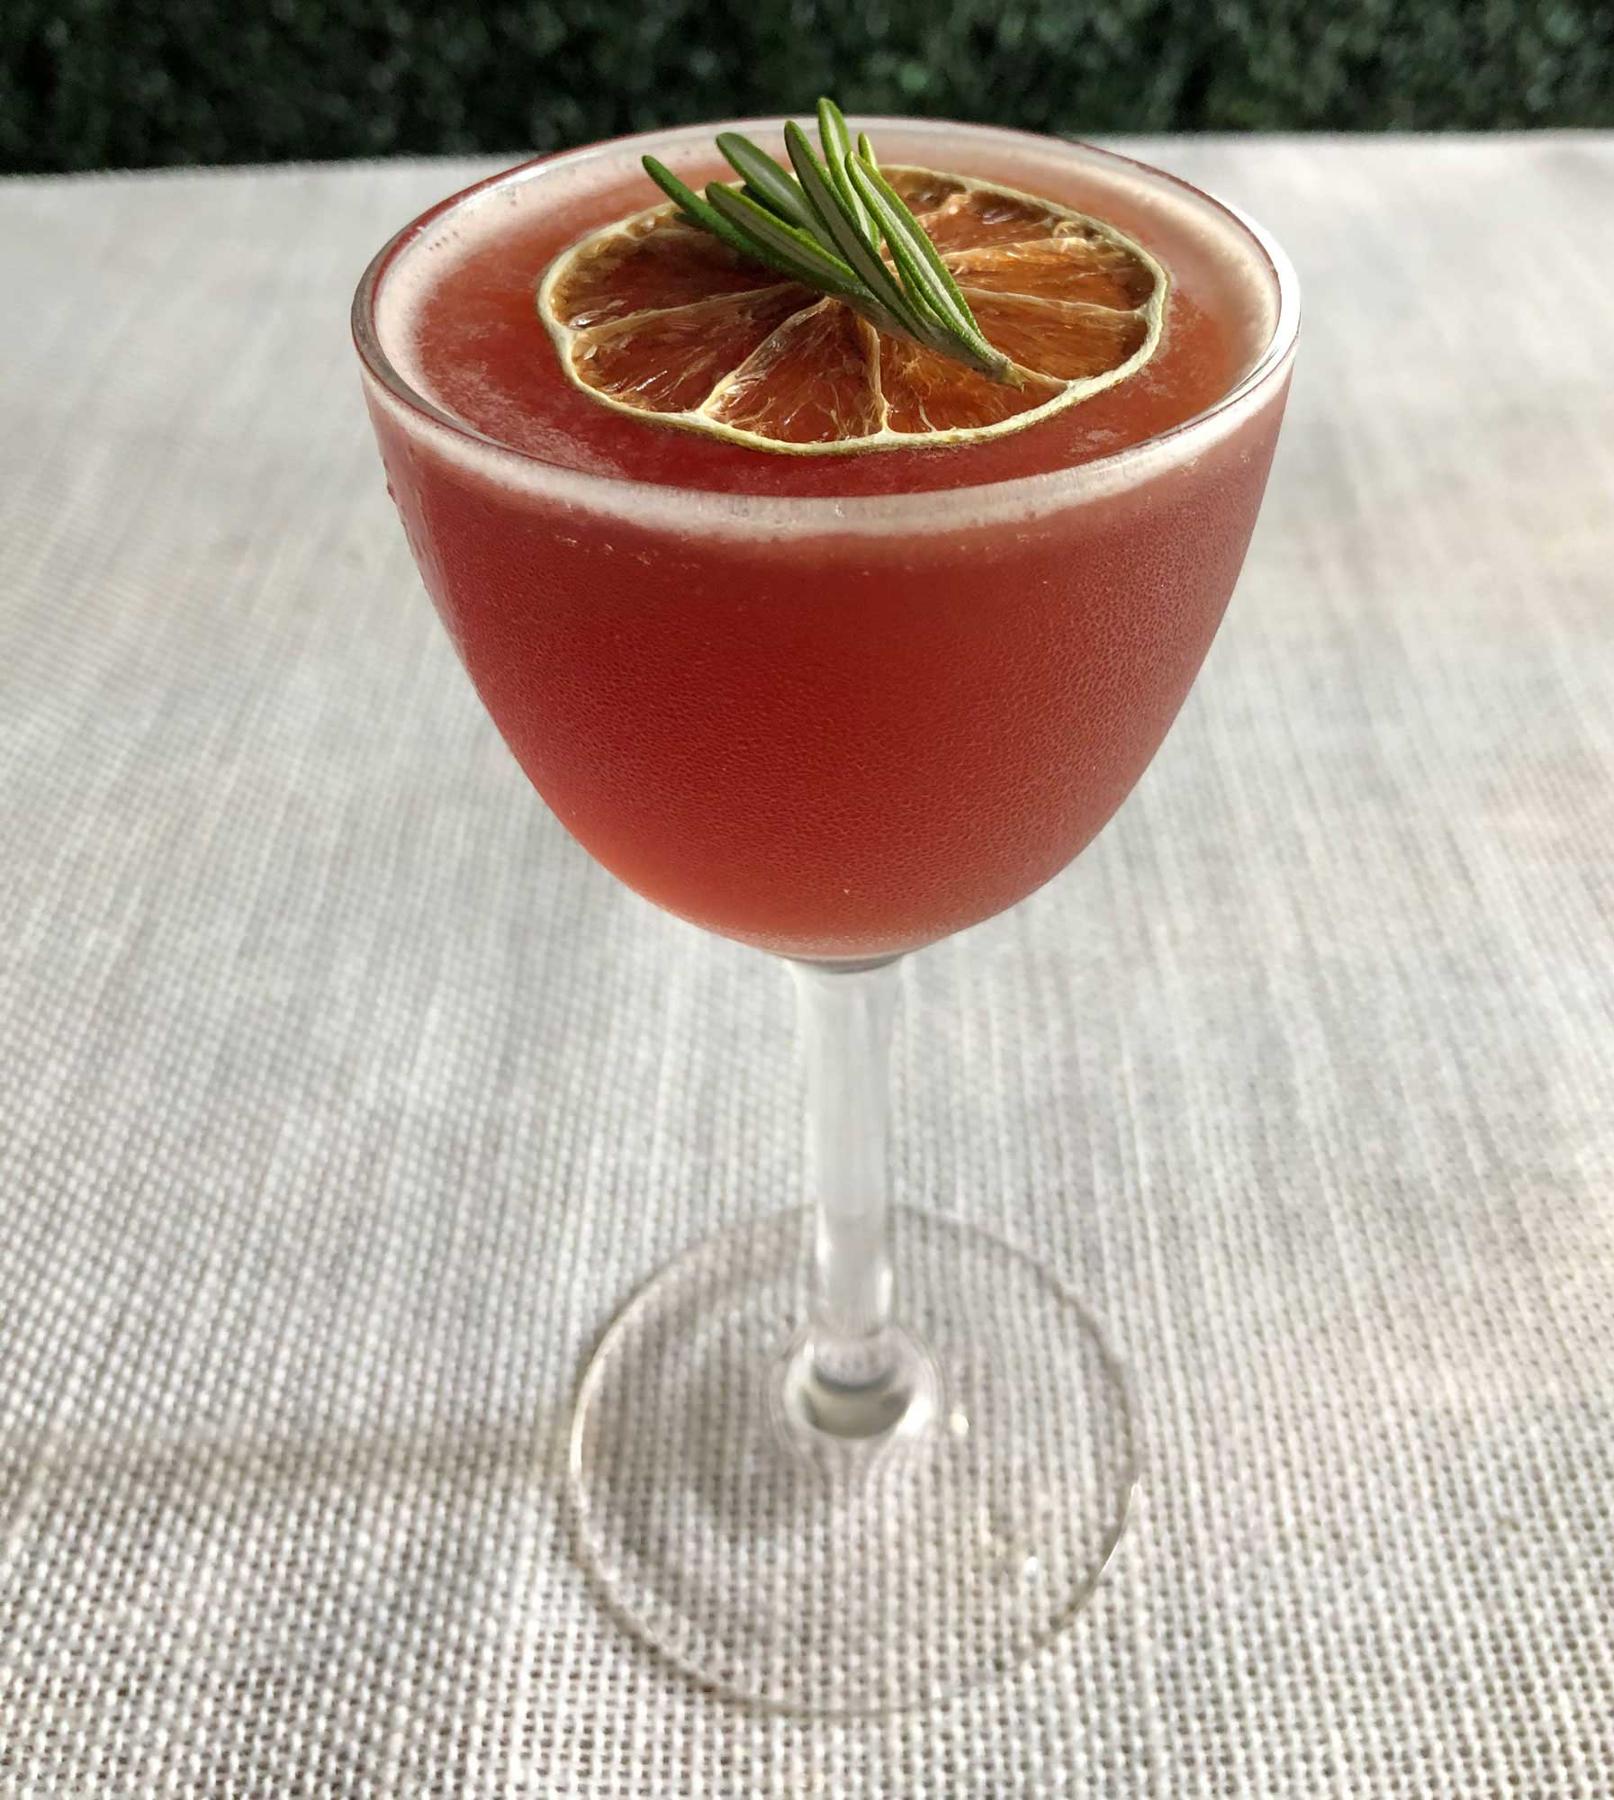 An example of the Alpine Hippie Juice, the mixed drink (drink), by Based on a drink by Snack Boys, Milwaukee, featuring Averell Damson Plum Gin Liqueur, cognac, Zirbenz Stone Pine Liqueur of the Alps, grapefruit juice, lime juice, and sprig of rosemary; photo by Lee Edwards